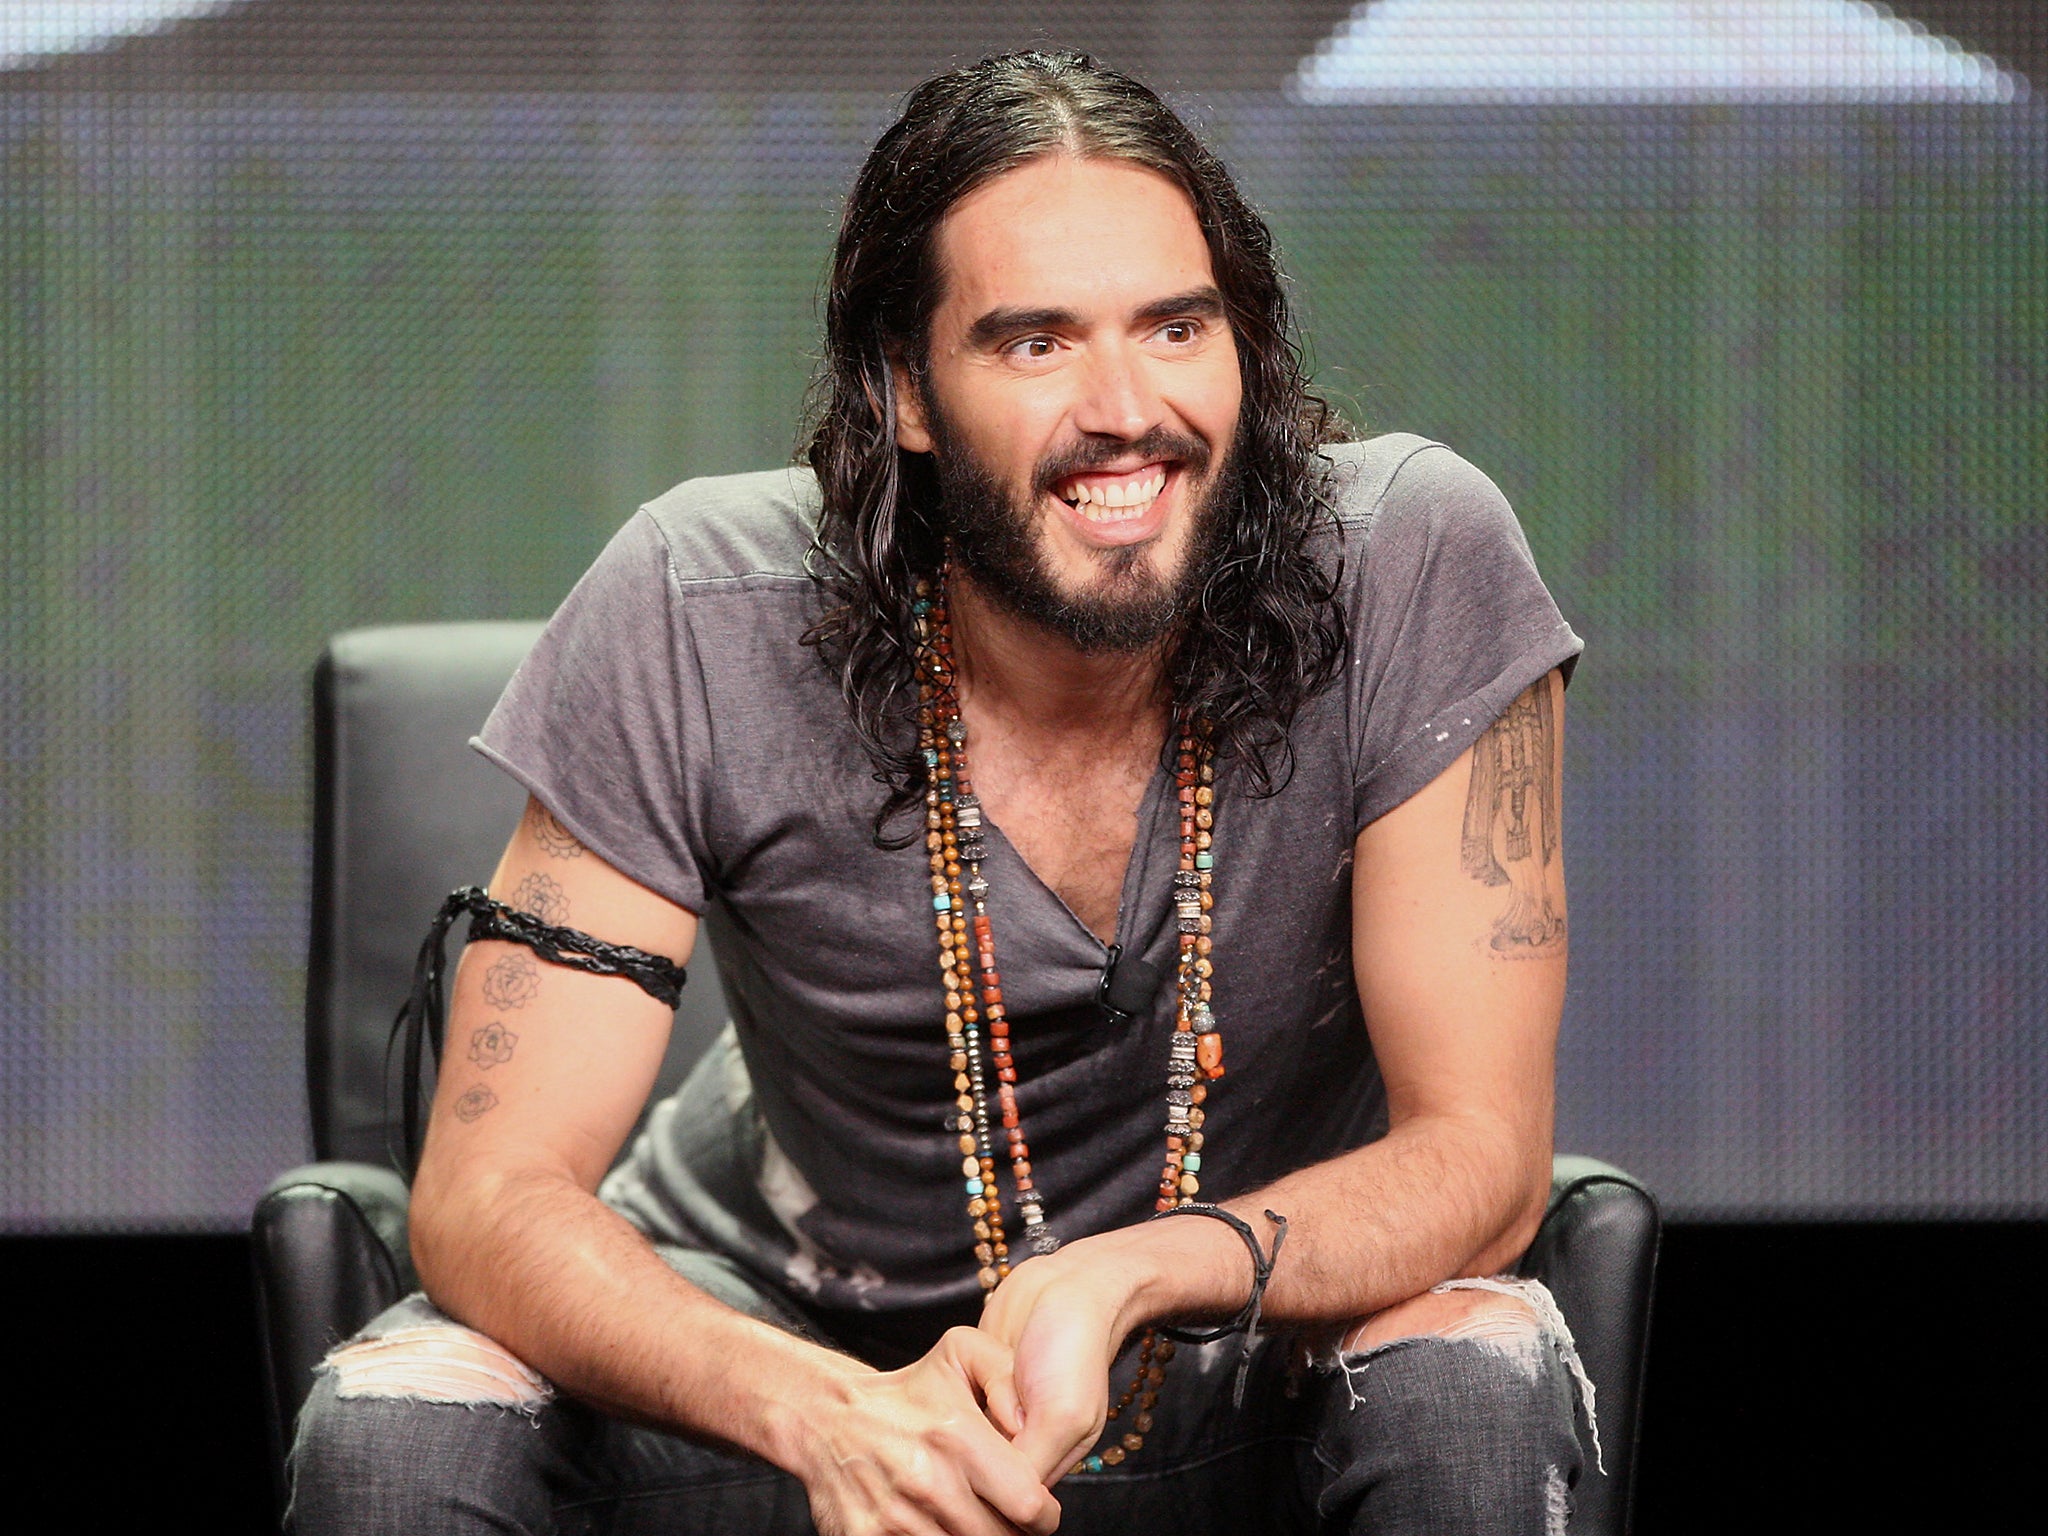 Russell Brand has spoken openly about going to rehab to treat his ‘sexual addiction’ (Getty)